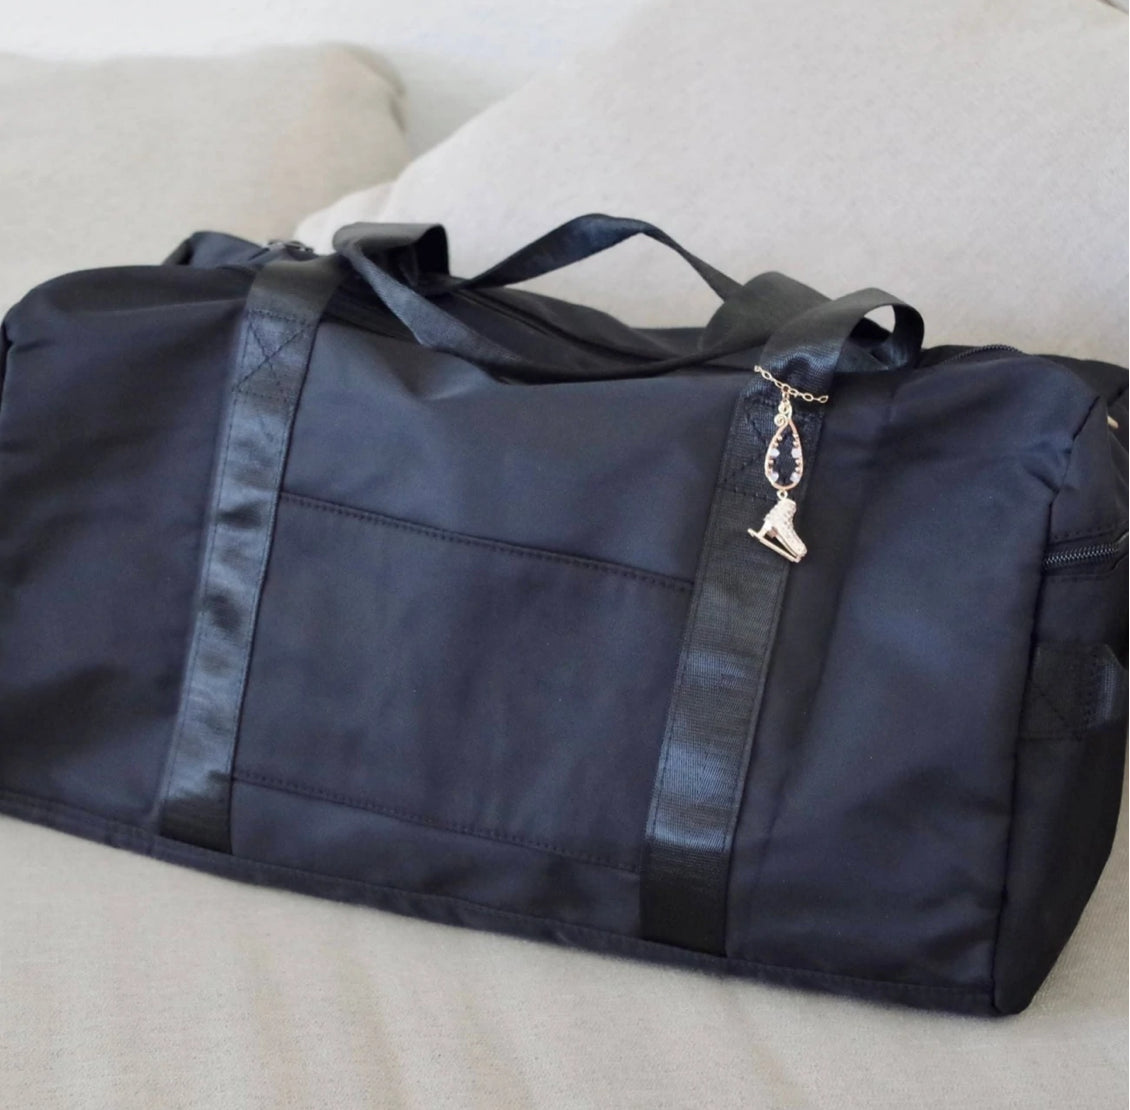 The Brilliance Sk8 Bag by Brilliance & Melrose